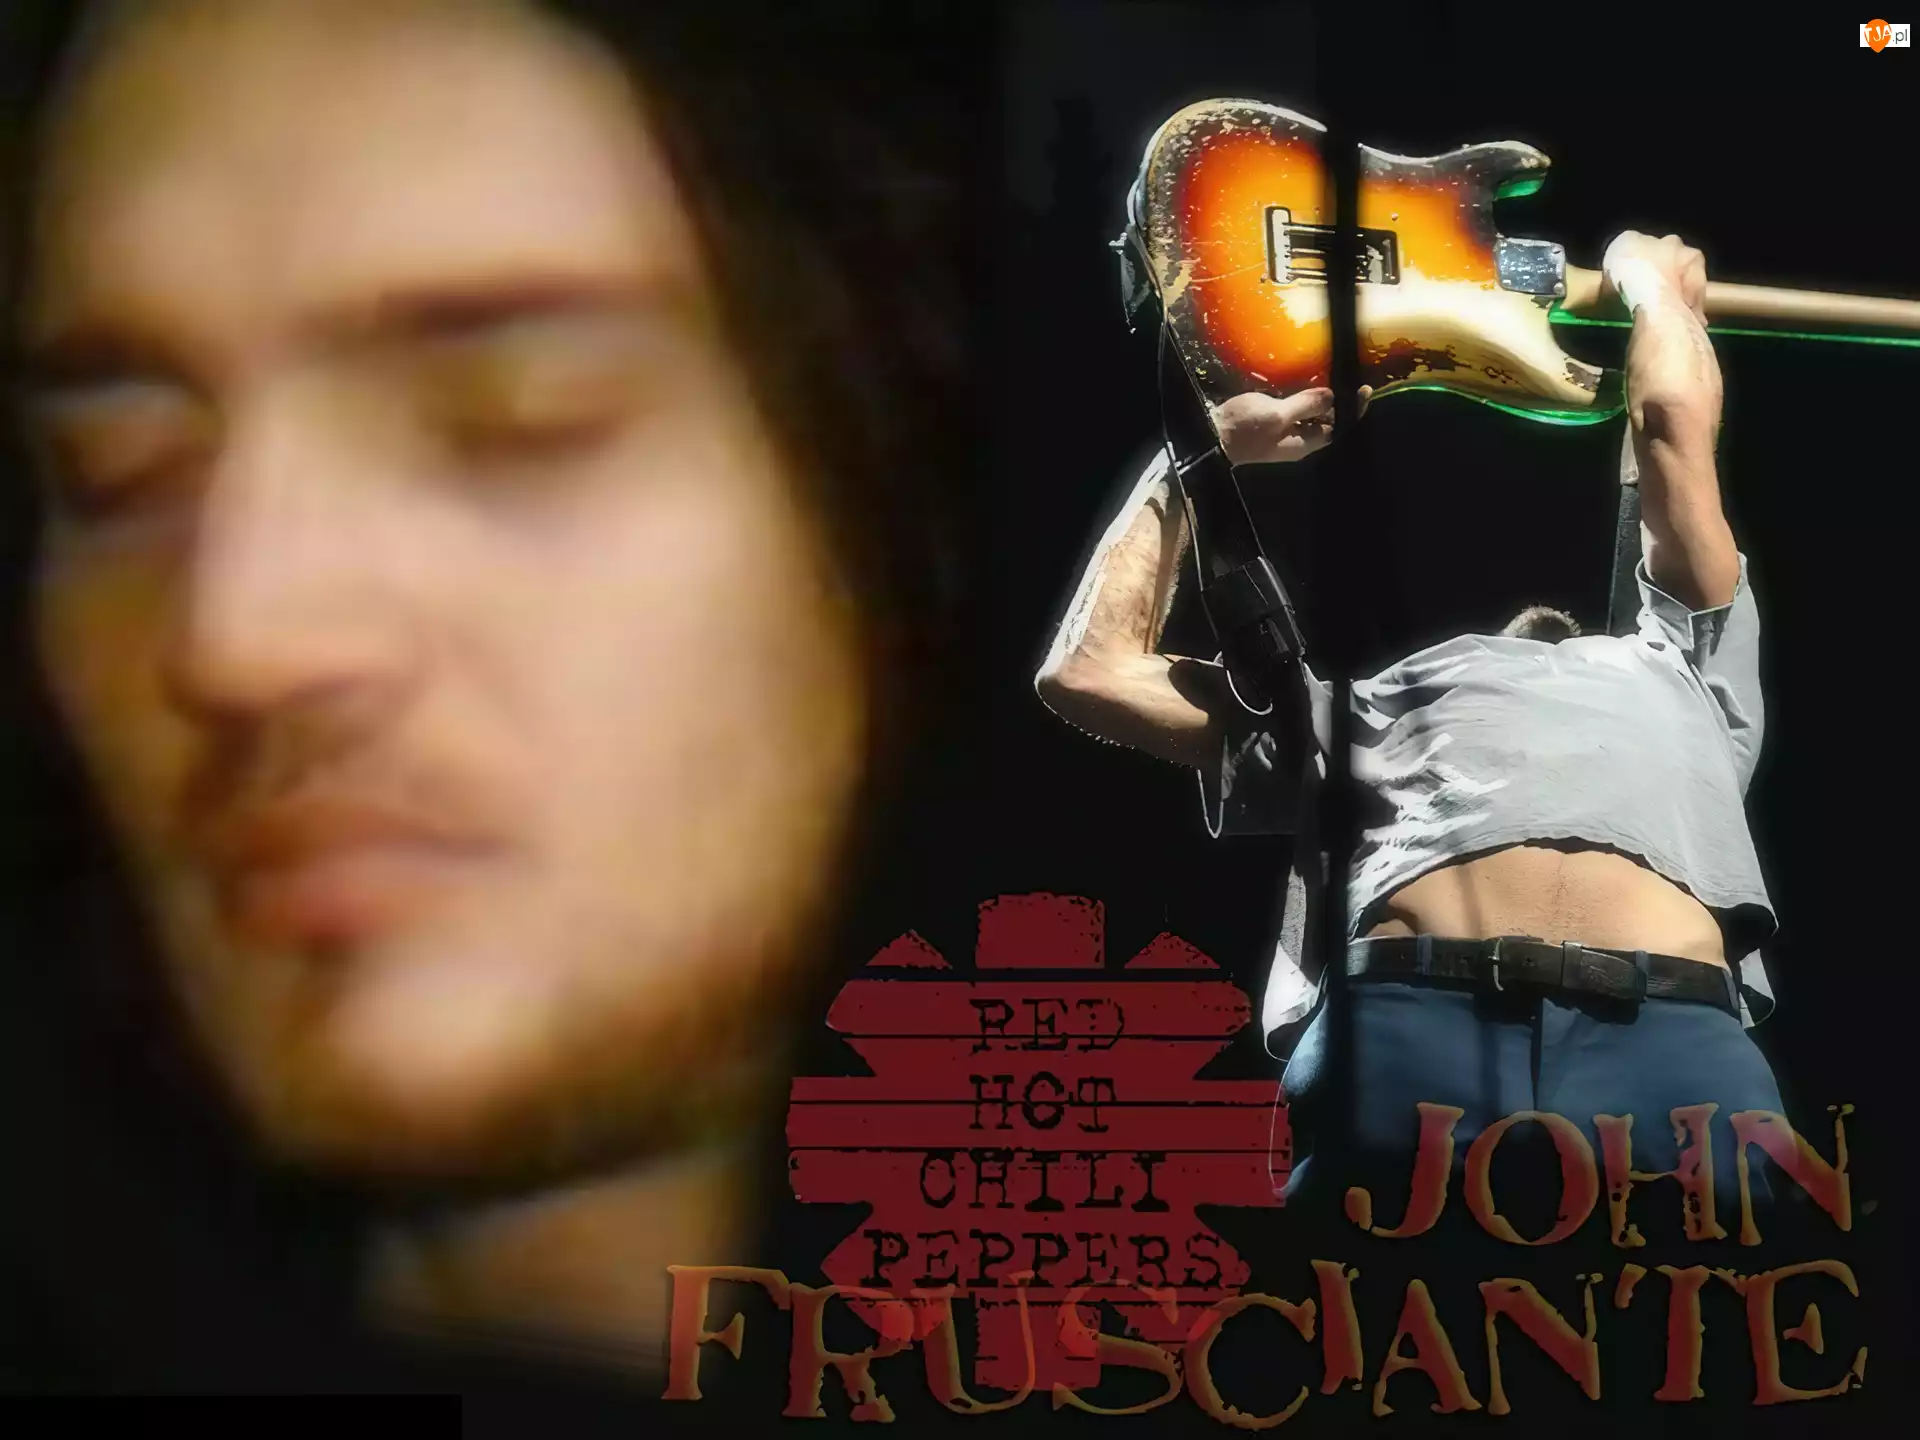 Red Hot Chili Peppers, John Frusciante